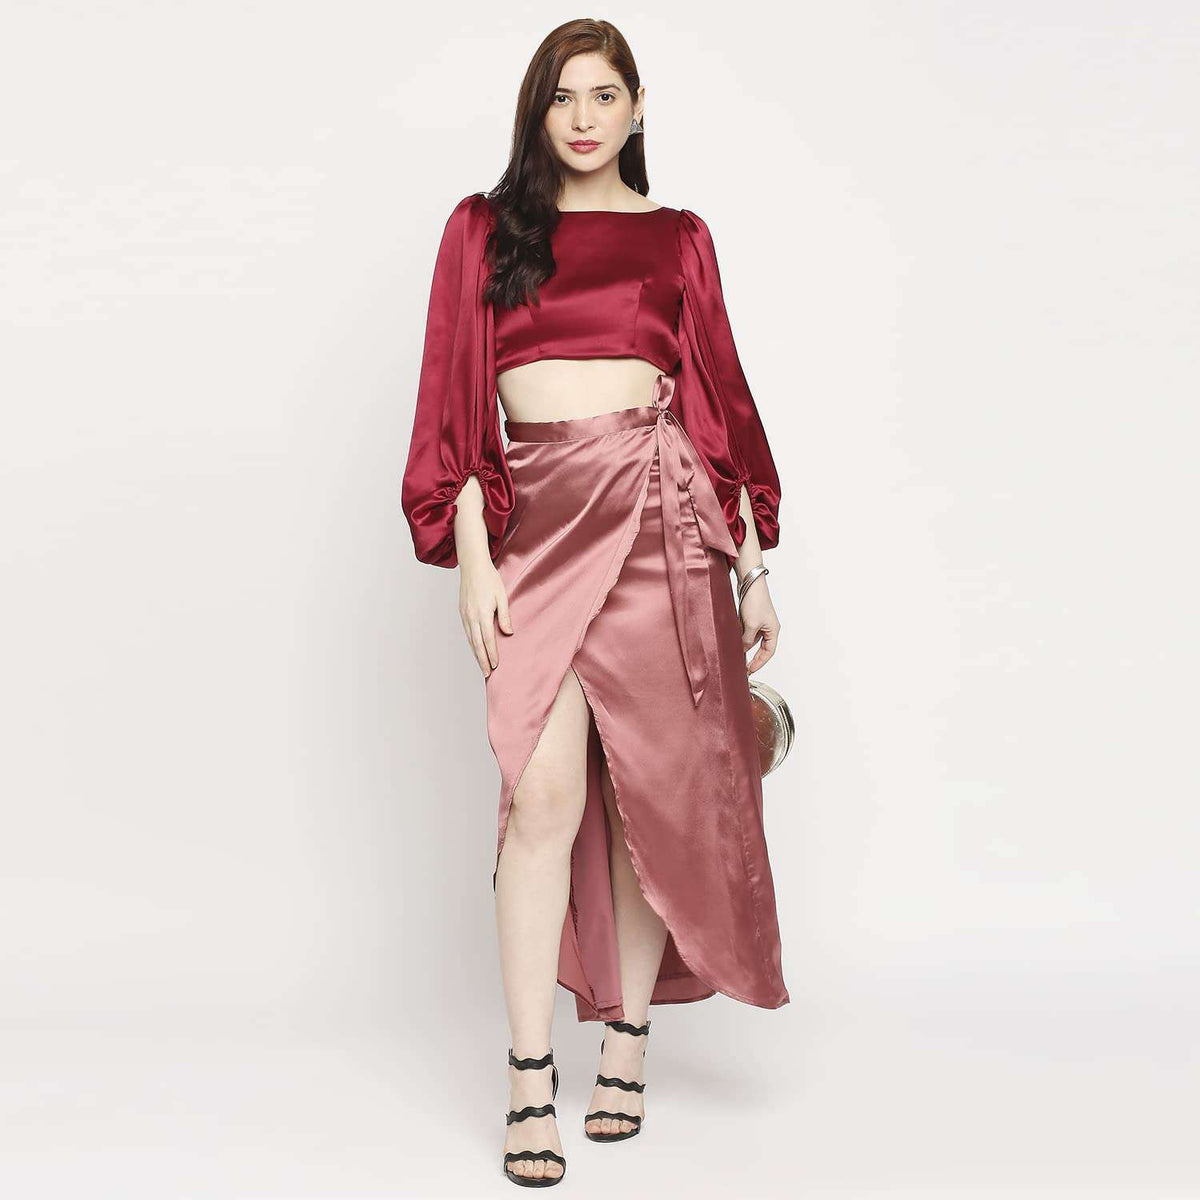 Rustic Pink Solid Satin Long Skirt-Wrap Knot